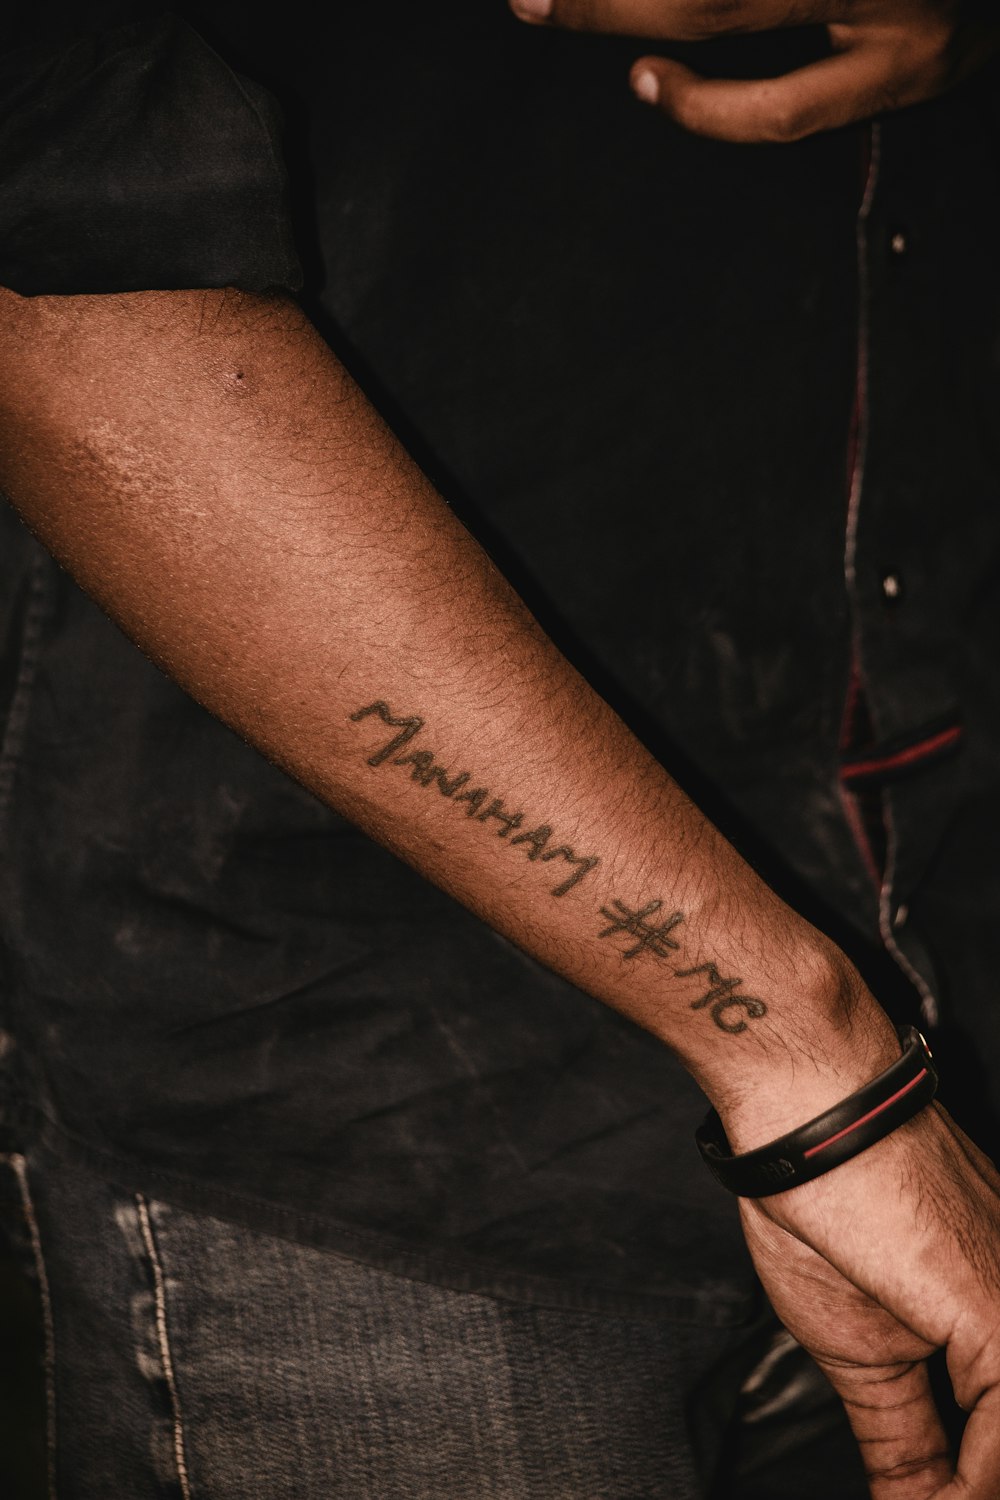 a person's arm with a tattoo on it